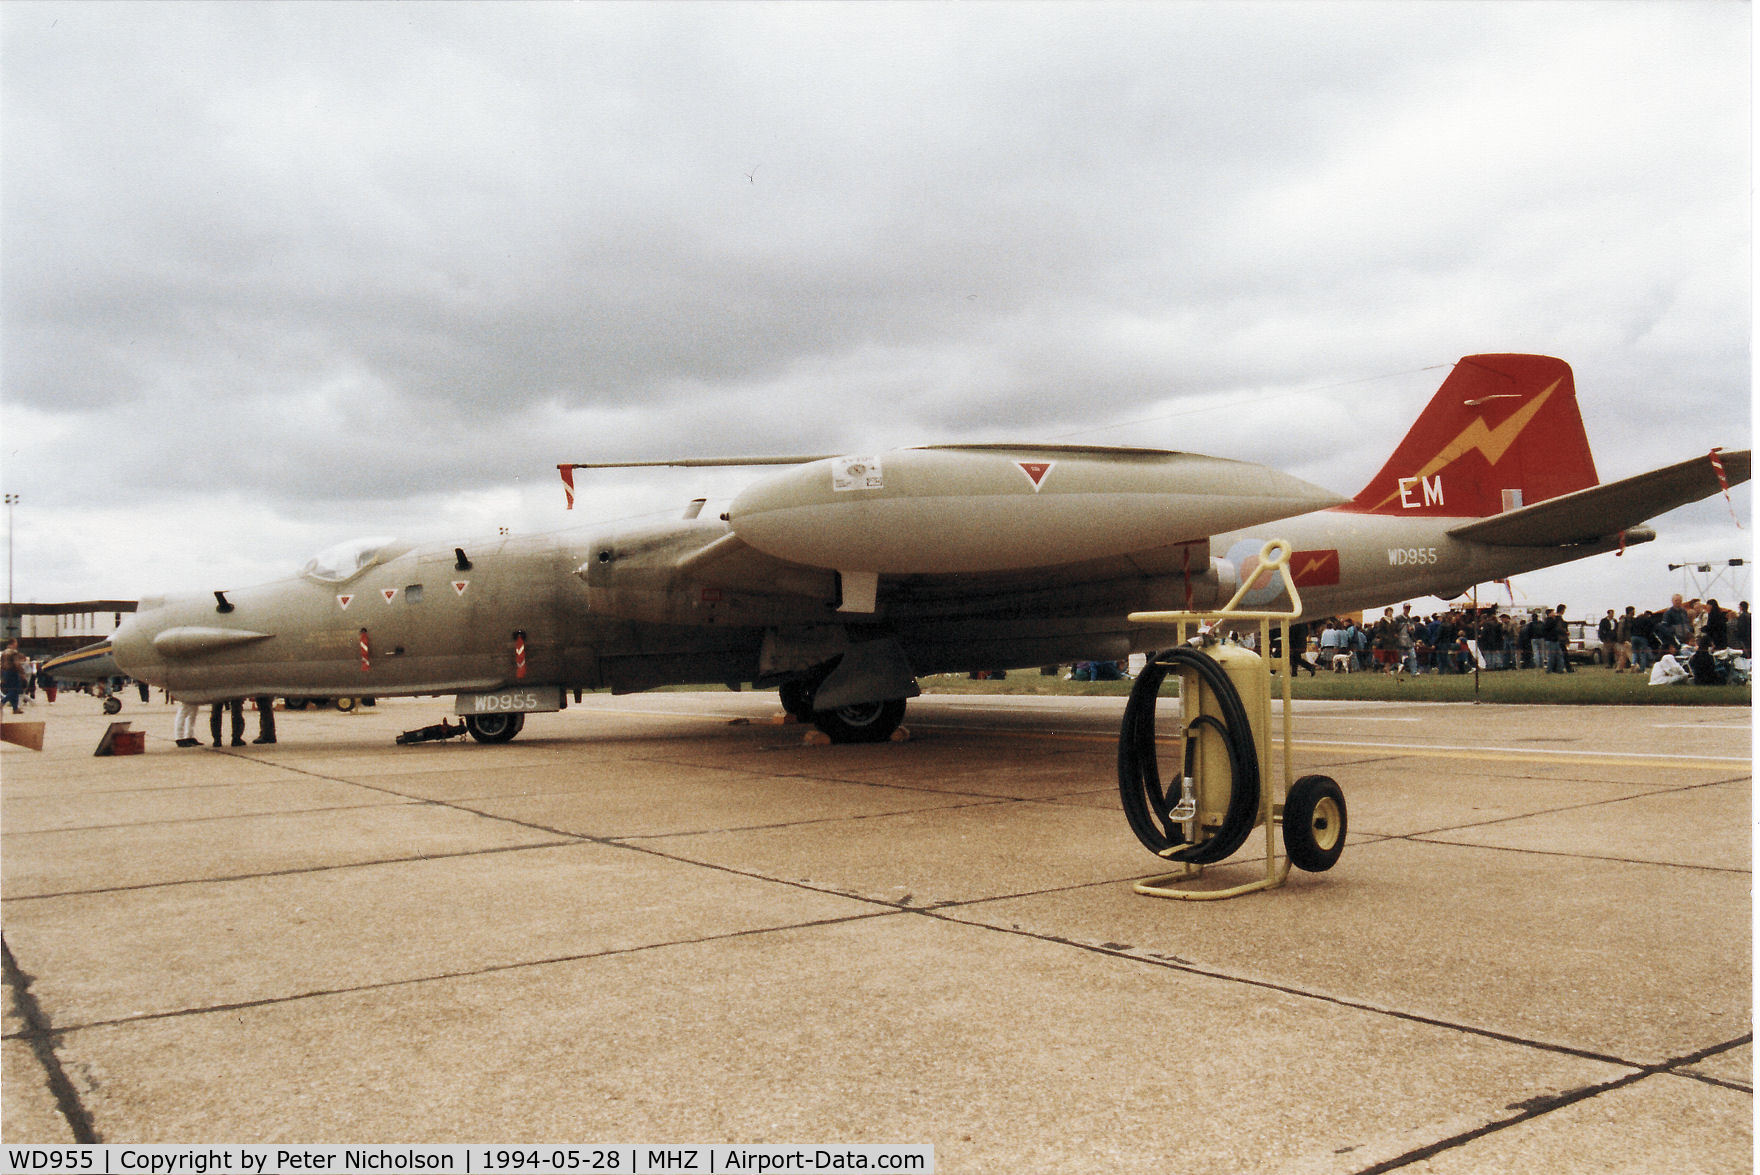 WD955, English Electric Canberra T.17 C/N EEP71037, Canberra T.17A of 360 Squadron at RAF Wyton on display at the 1994 RAF Mildenhall Air Fete.